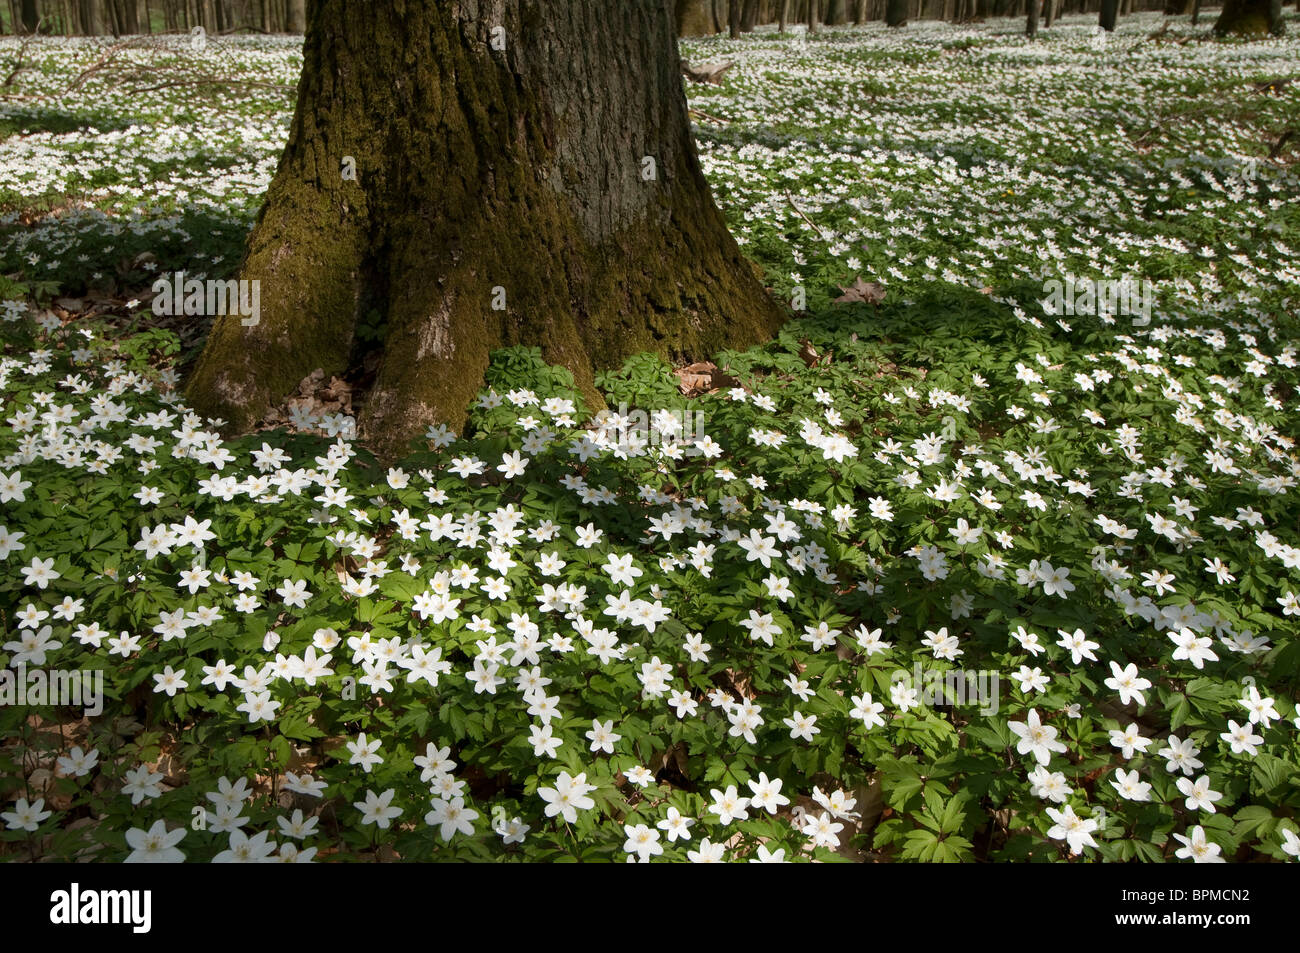 Wood Anemone (Anemone nemorosa). Flowering plants covering the floor of a beech wood in spring. Stock Photo